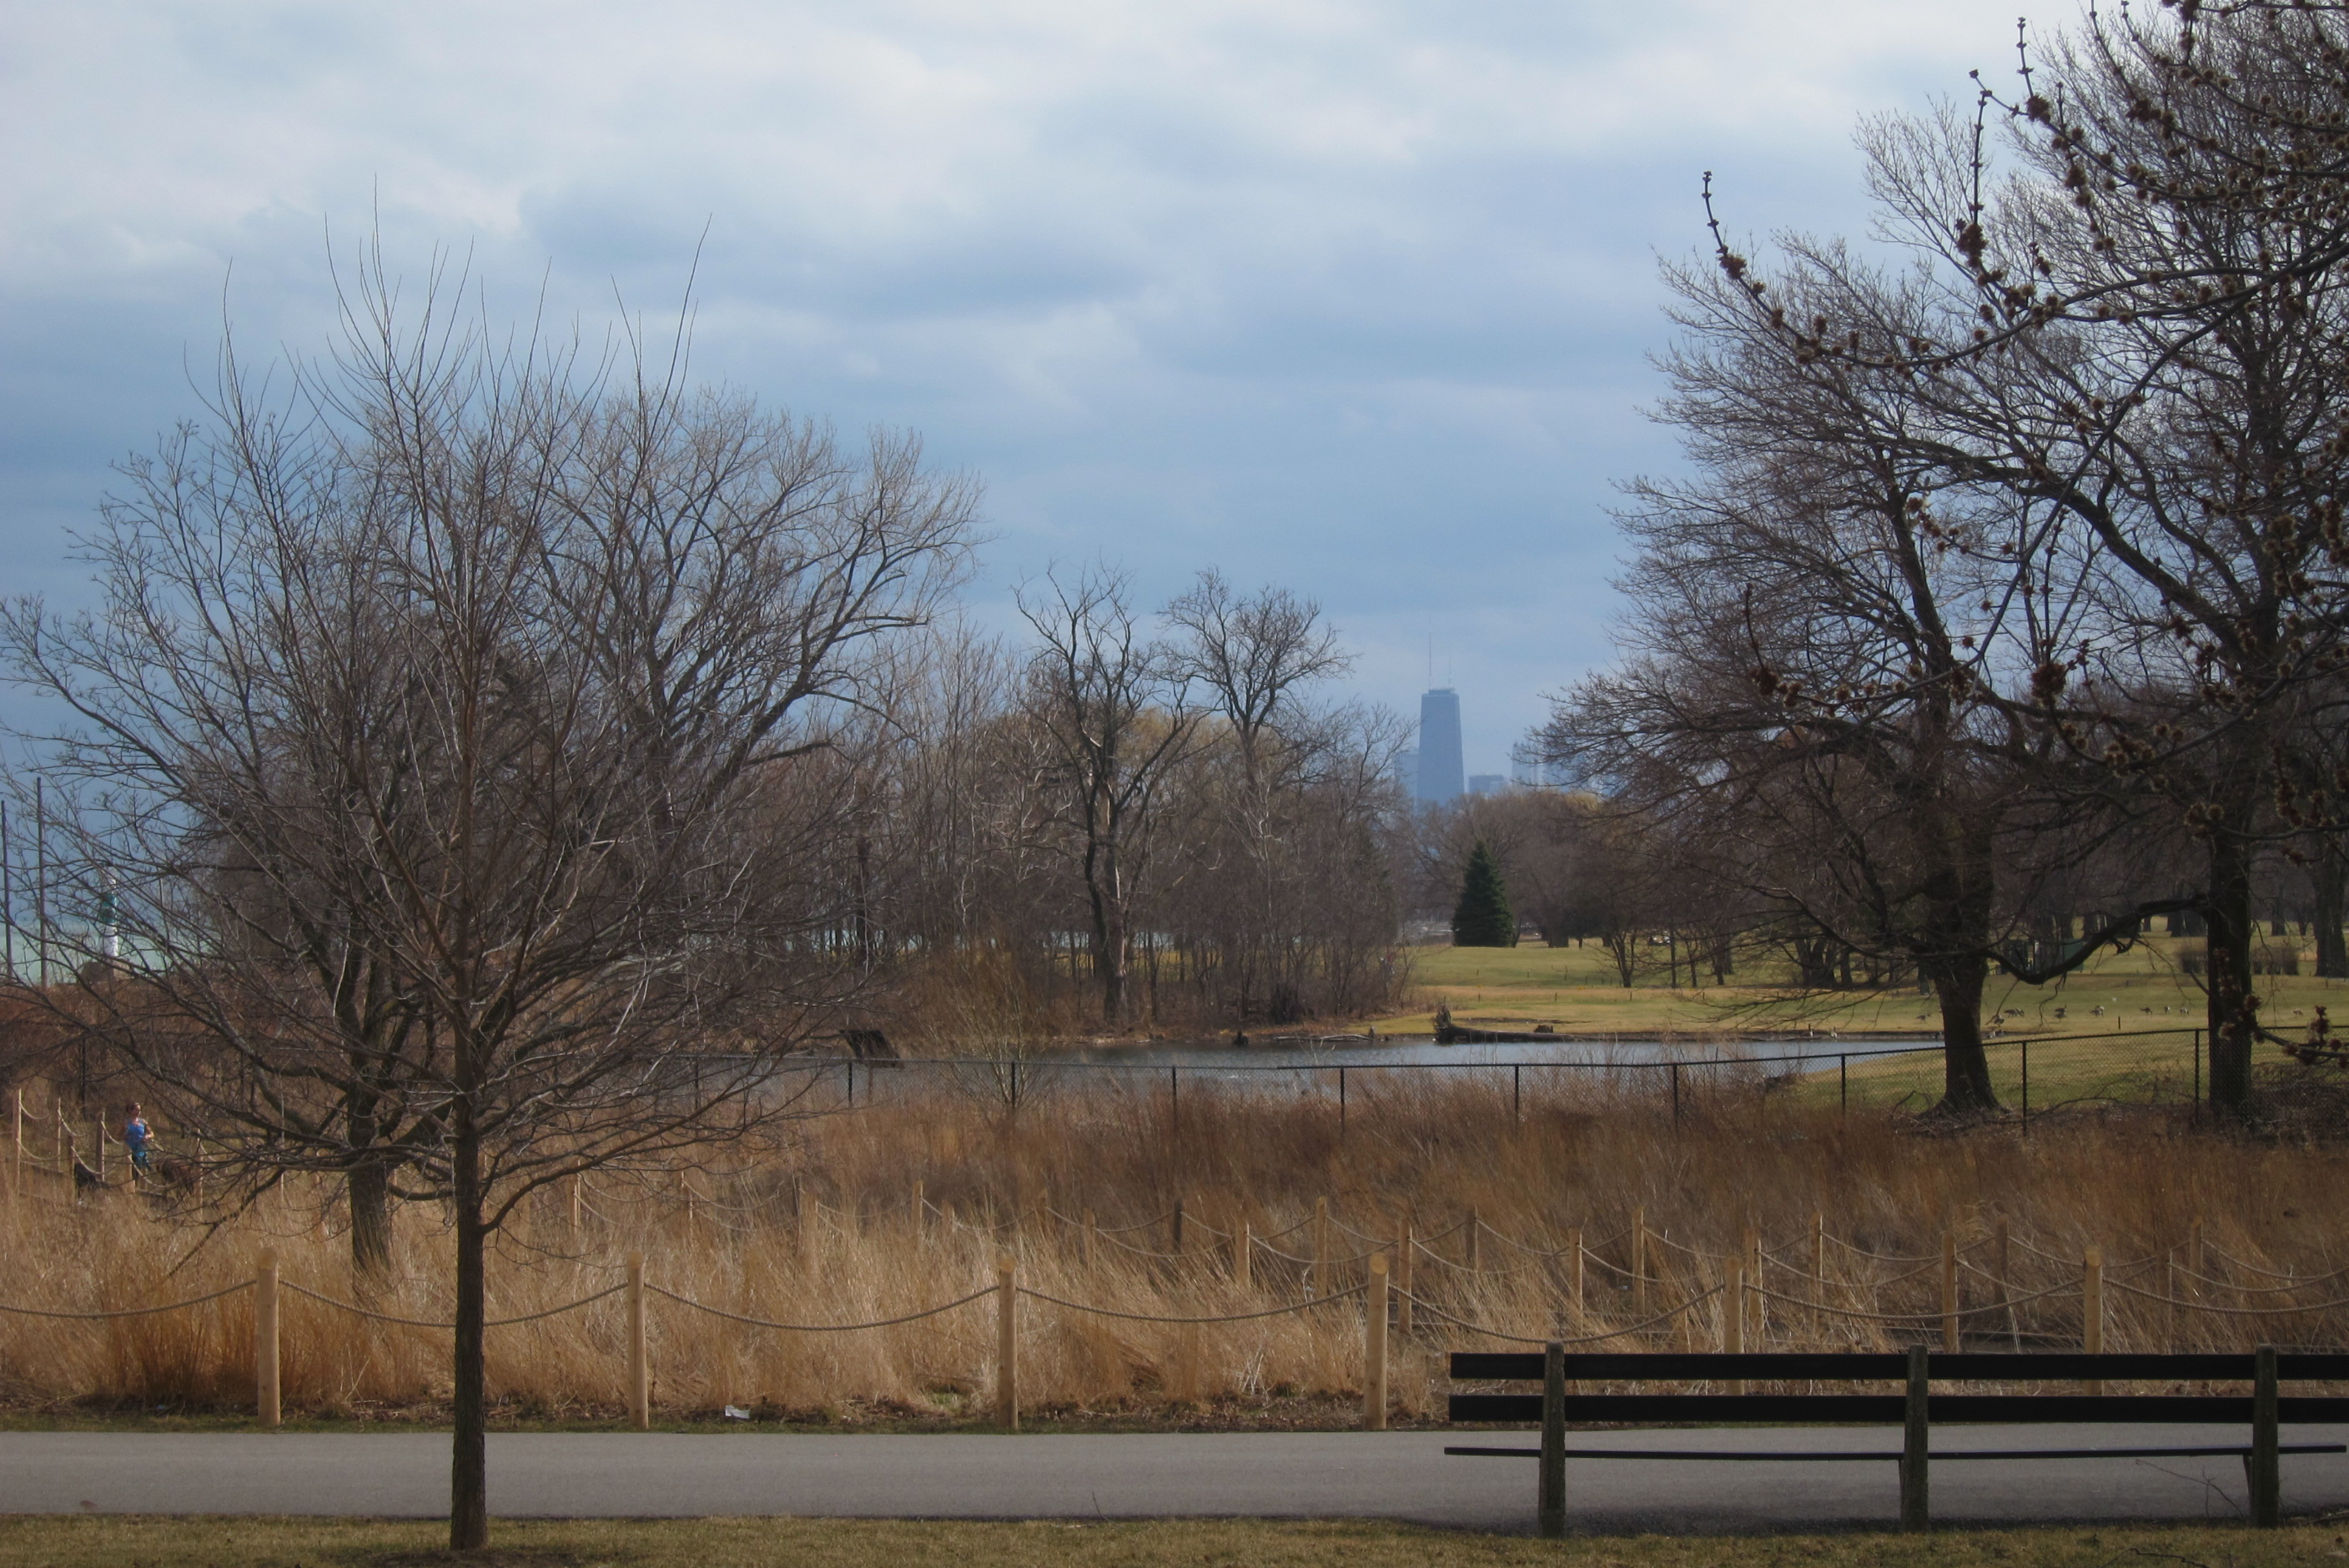 Prairie grasses, a water hazard, a bit of the Lake, and the Hancock visible in the distance.